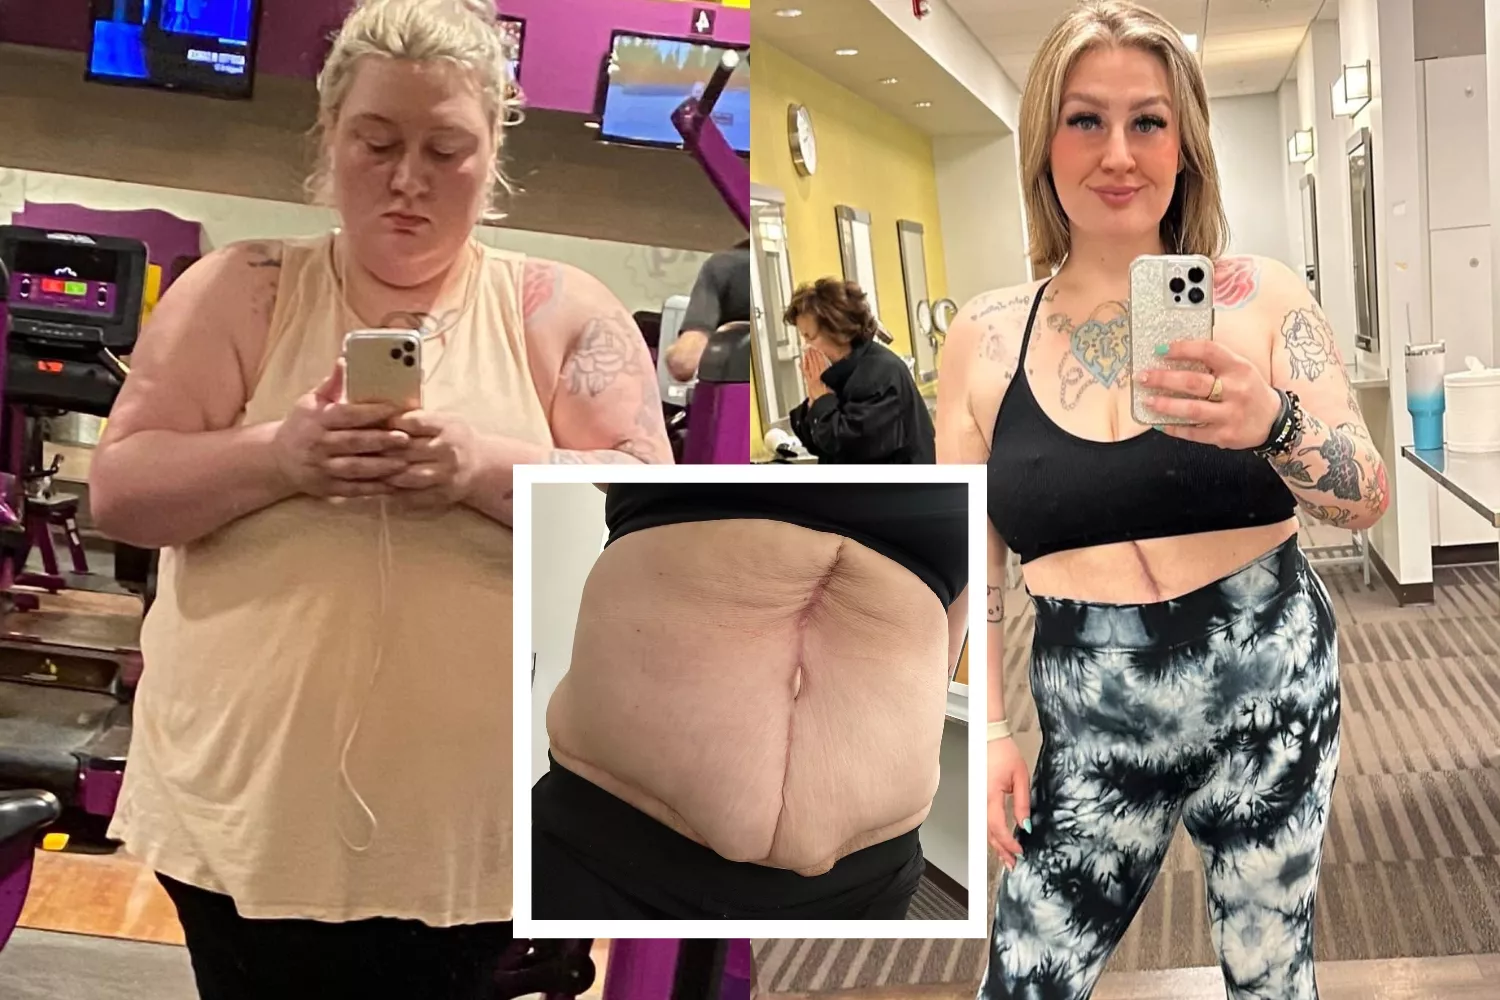 Woman, 28, who has saggy skin that makes her look DECADES older